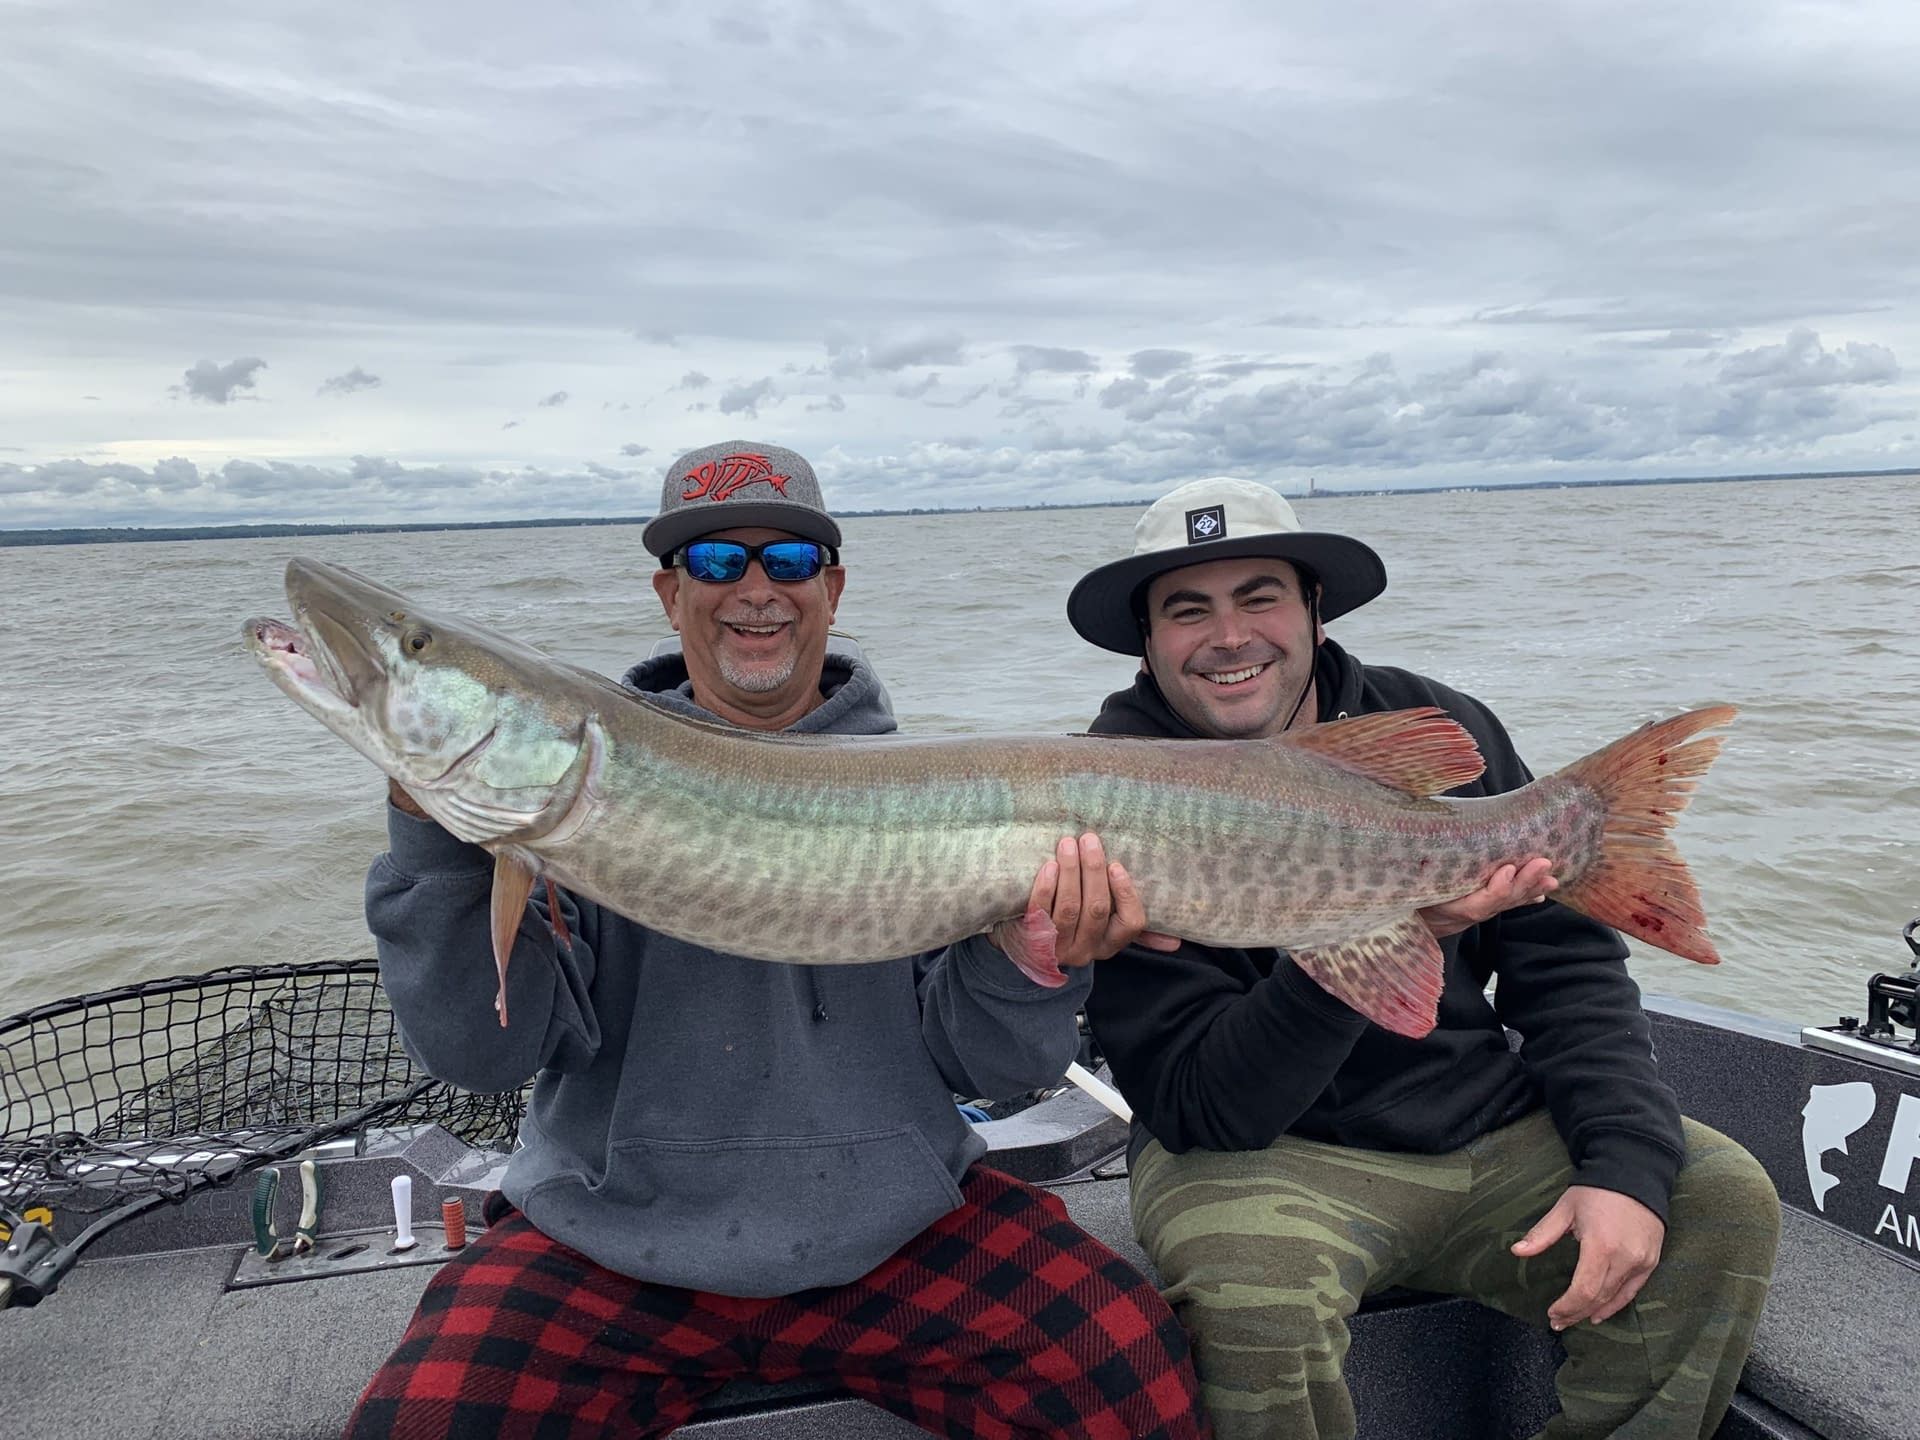 Epic Guide Service - Green Bay and Fox River Musky Trip in Green